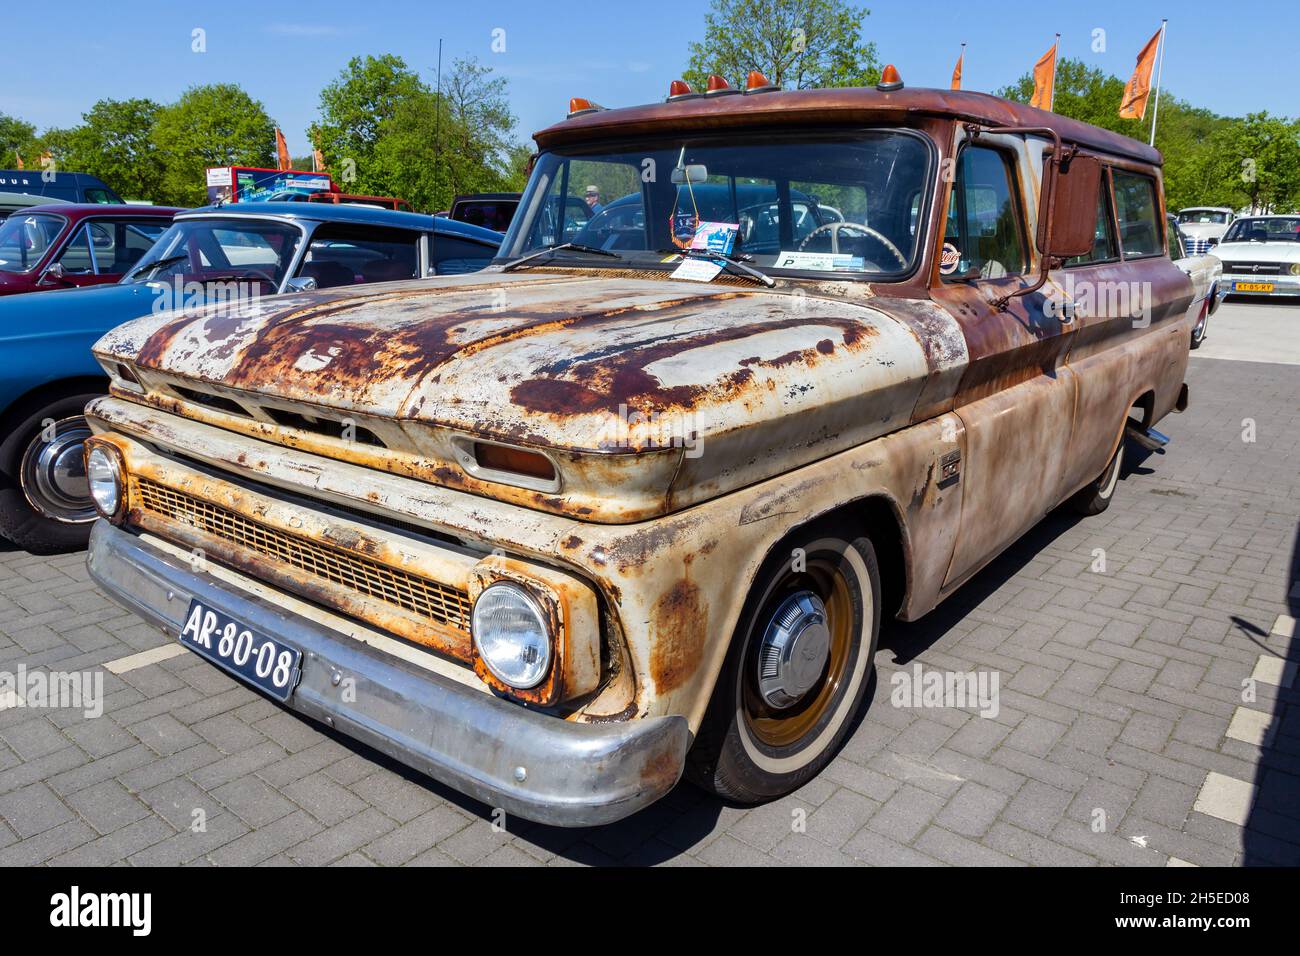 1966 Chevrolet Suburban C10 classic car on the parking lot. Rosmalen, The Netherlands - May 8, 2016 Stock Photo